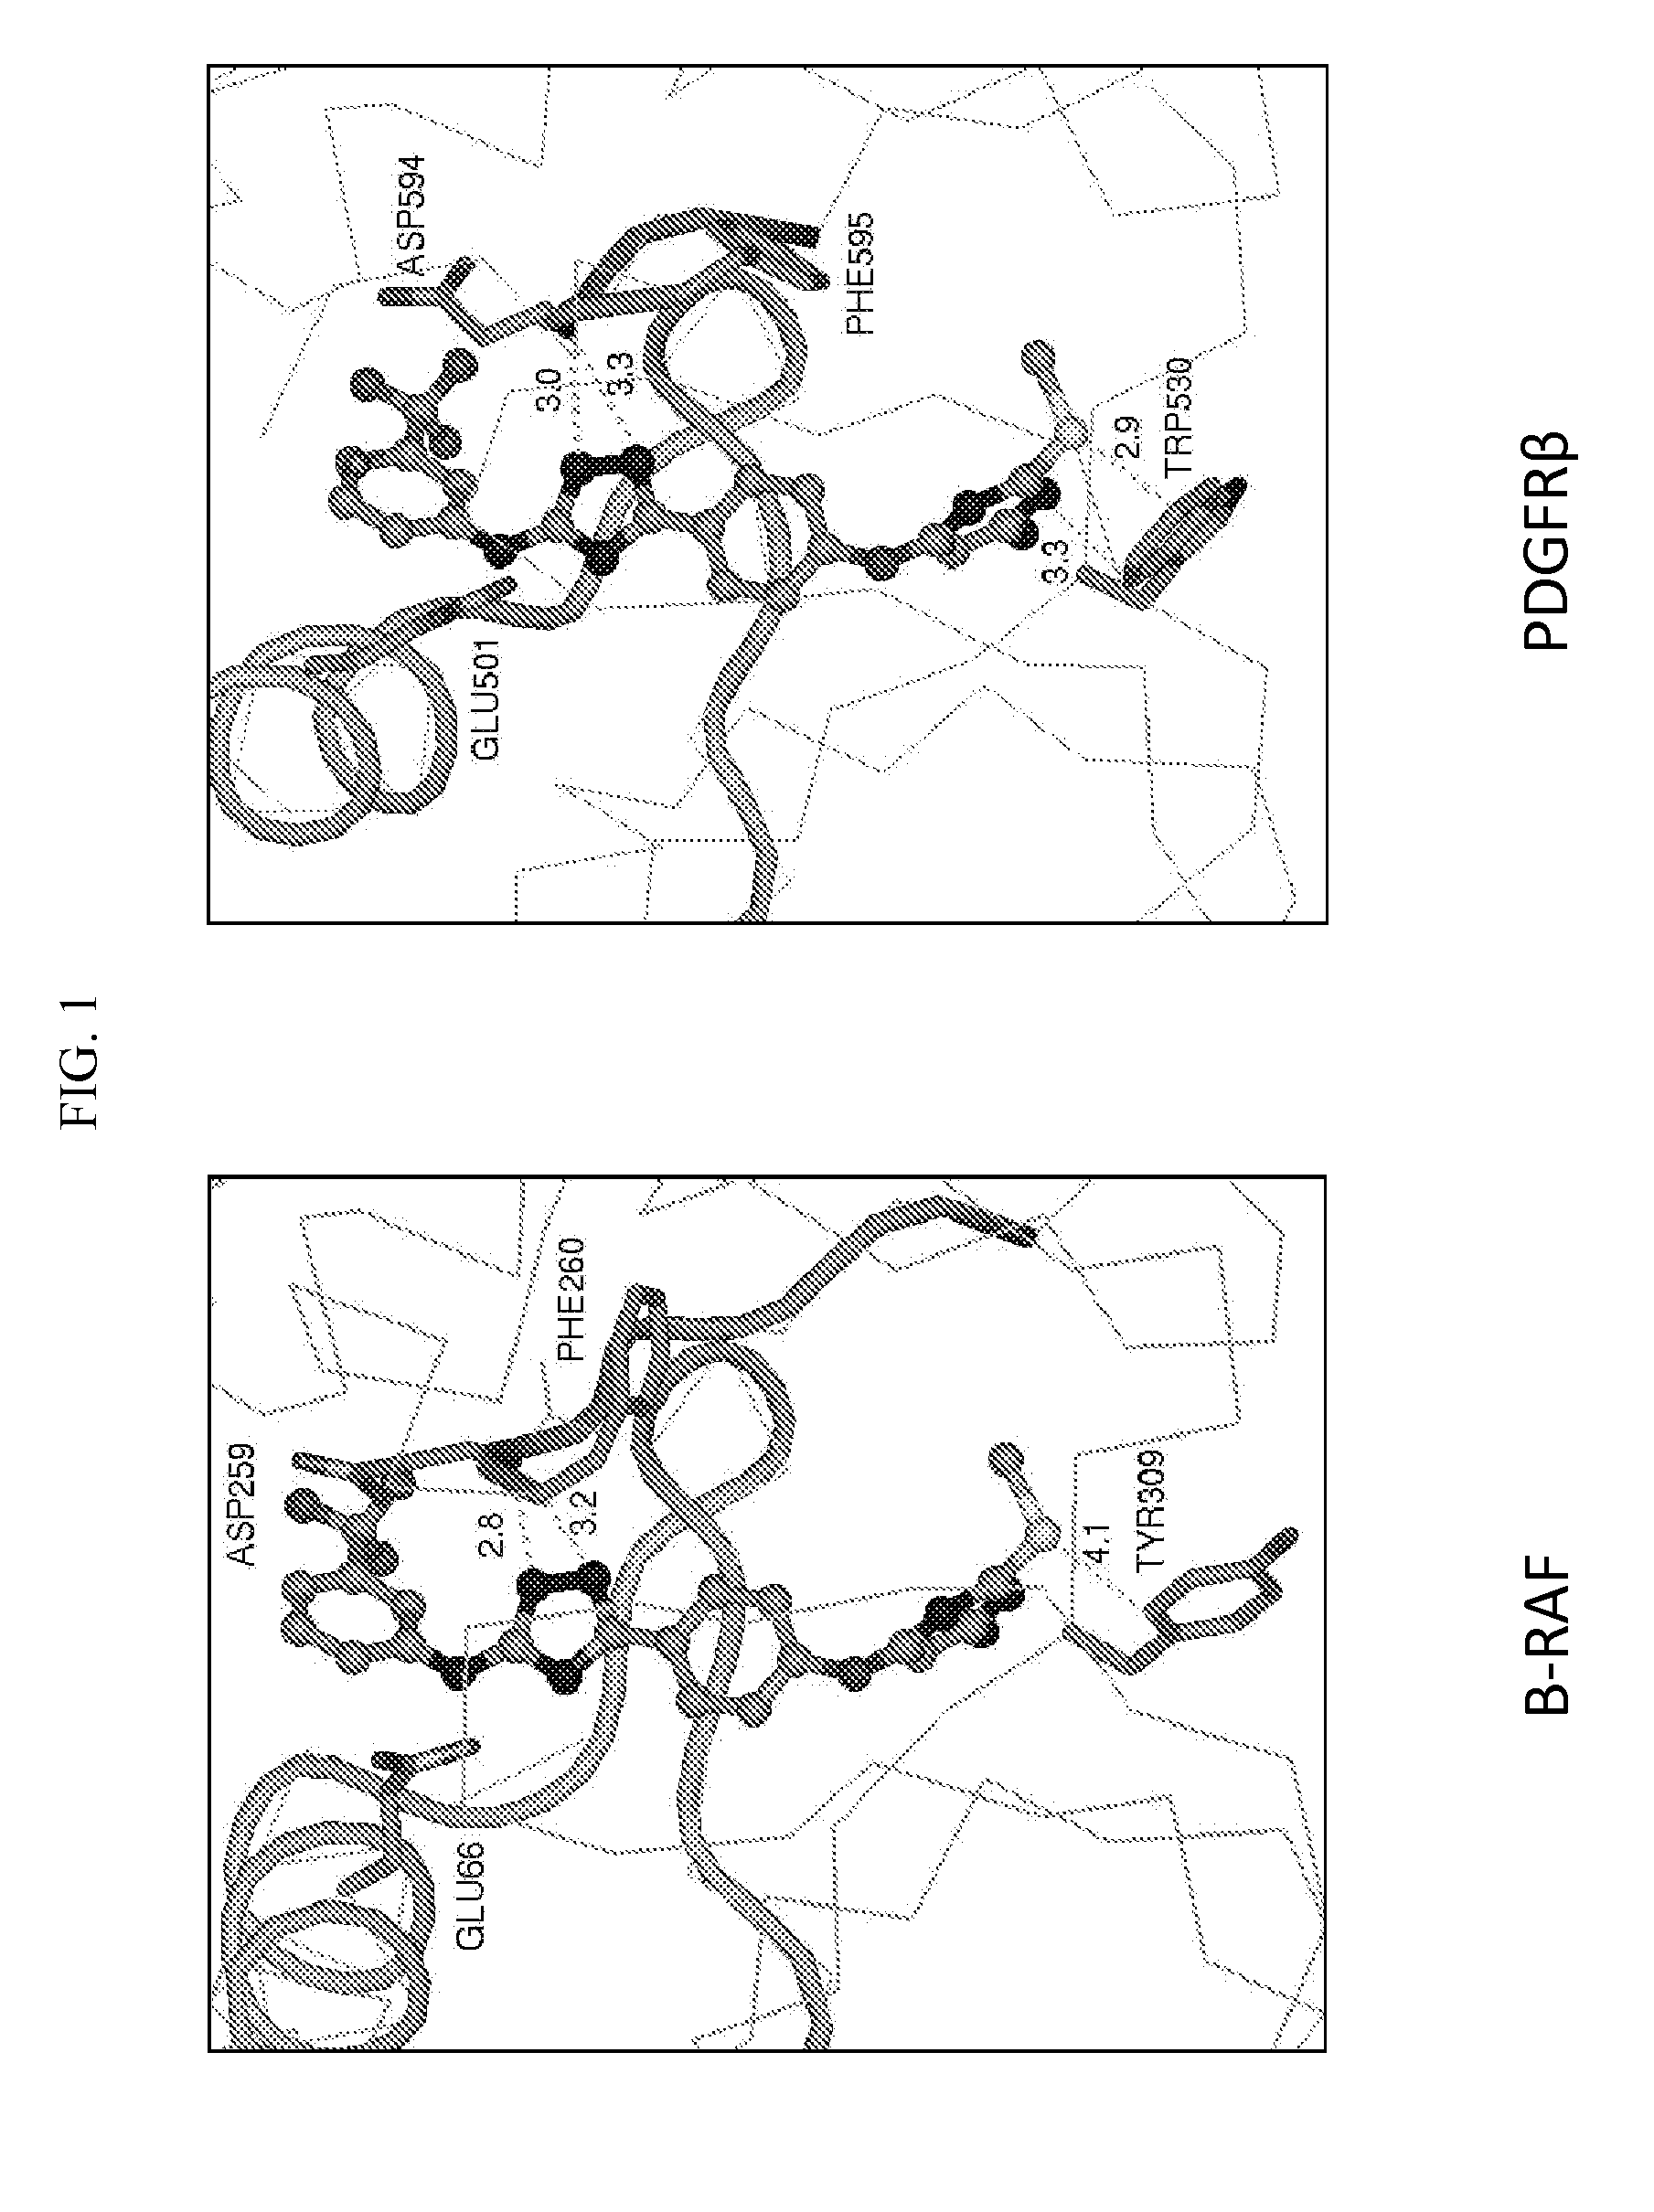 Therapeutic methods and compositions involving allosteric kinase inhibition